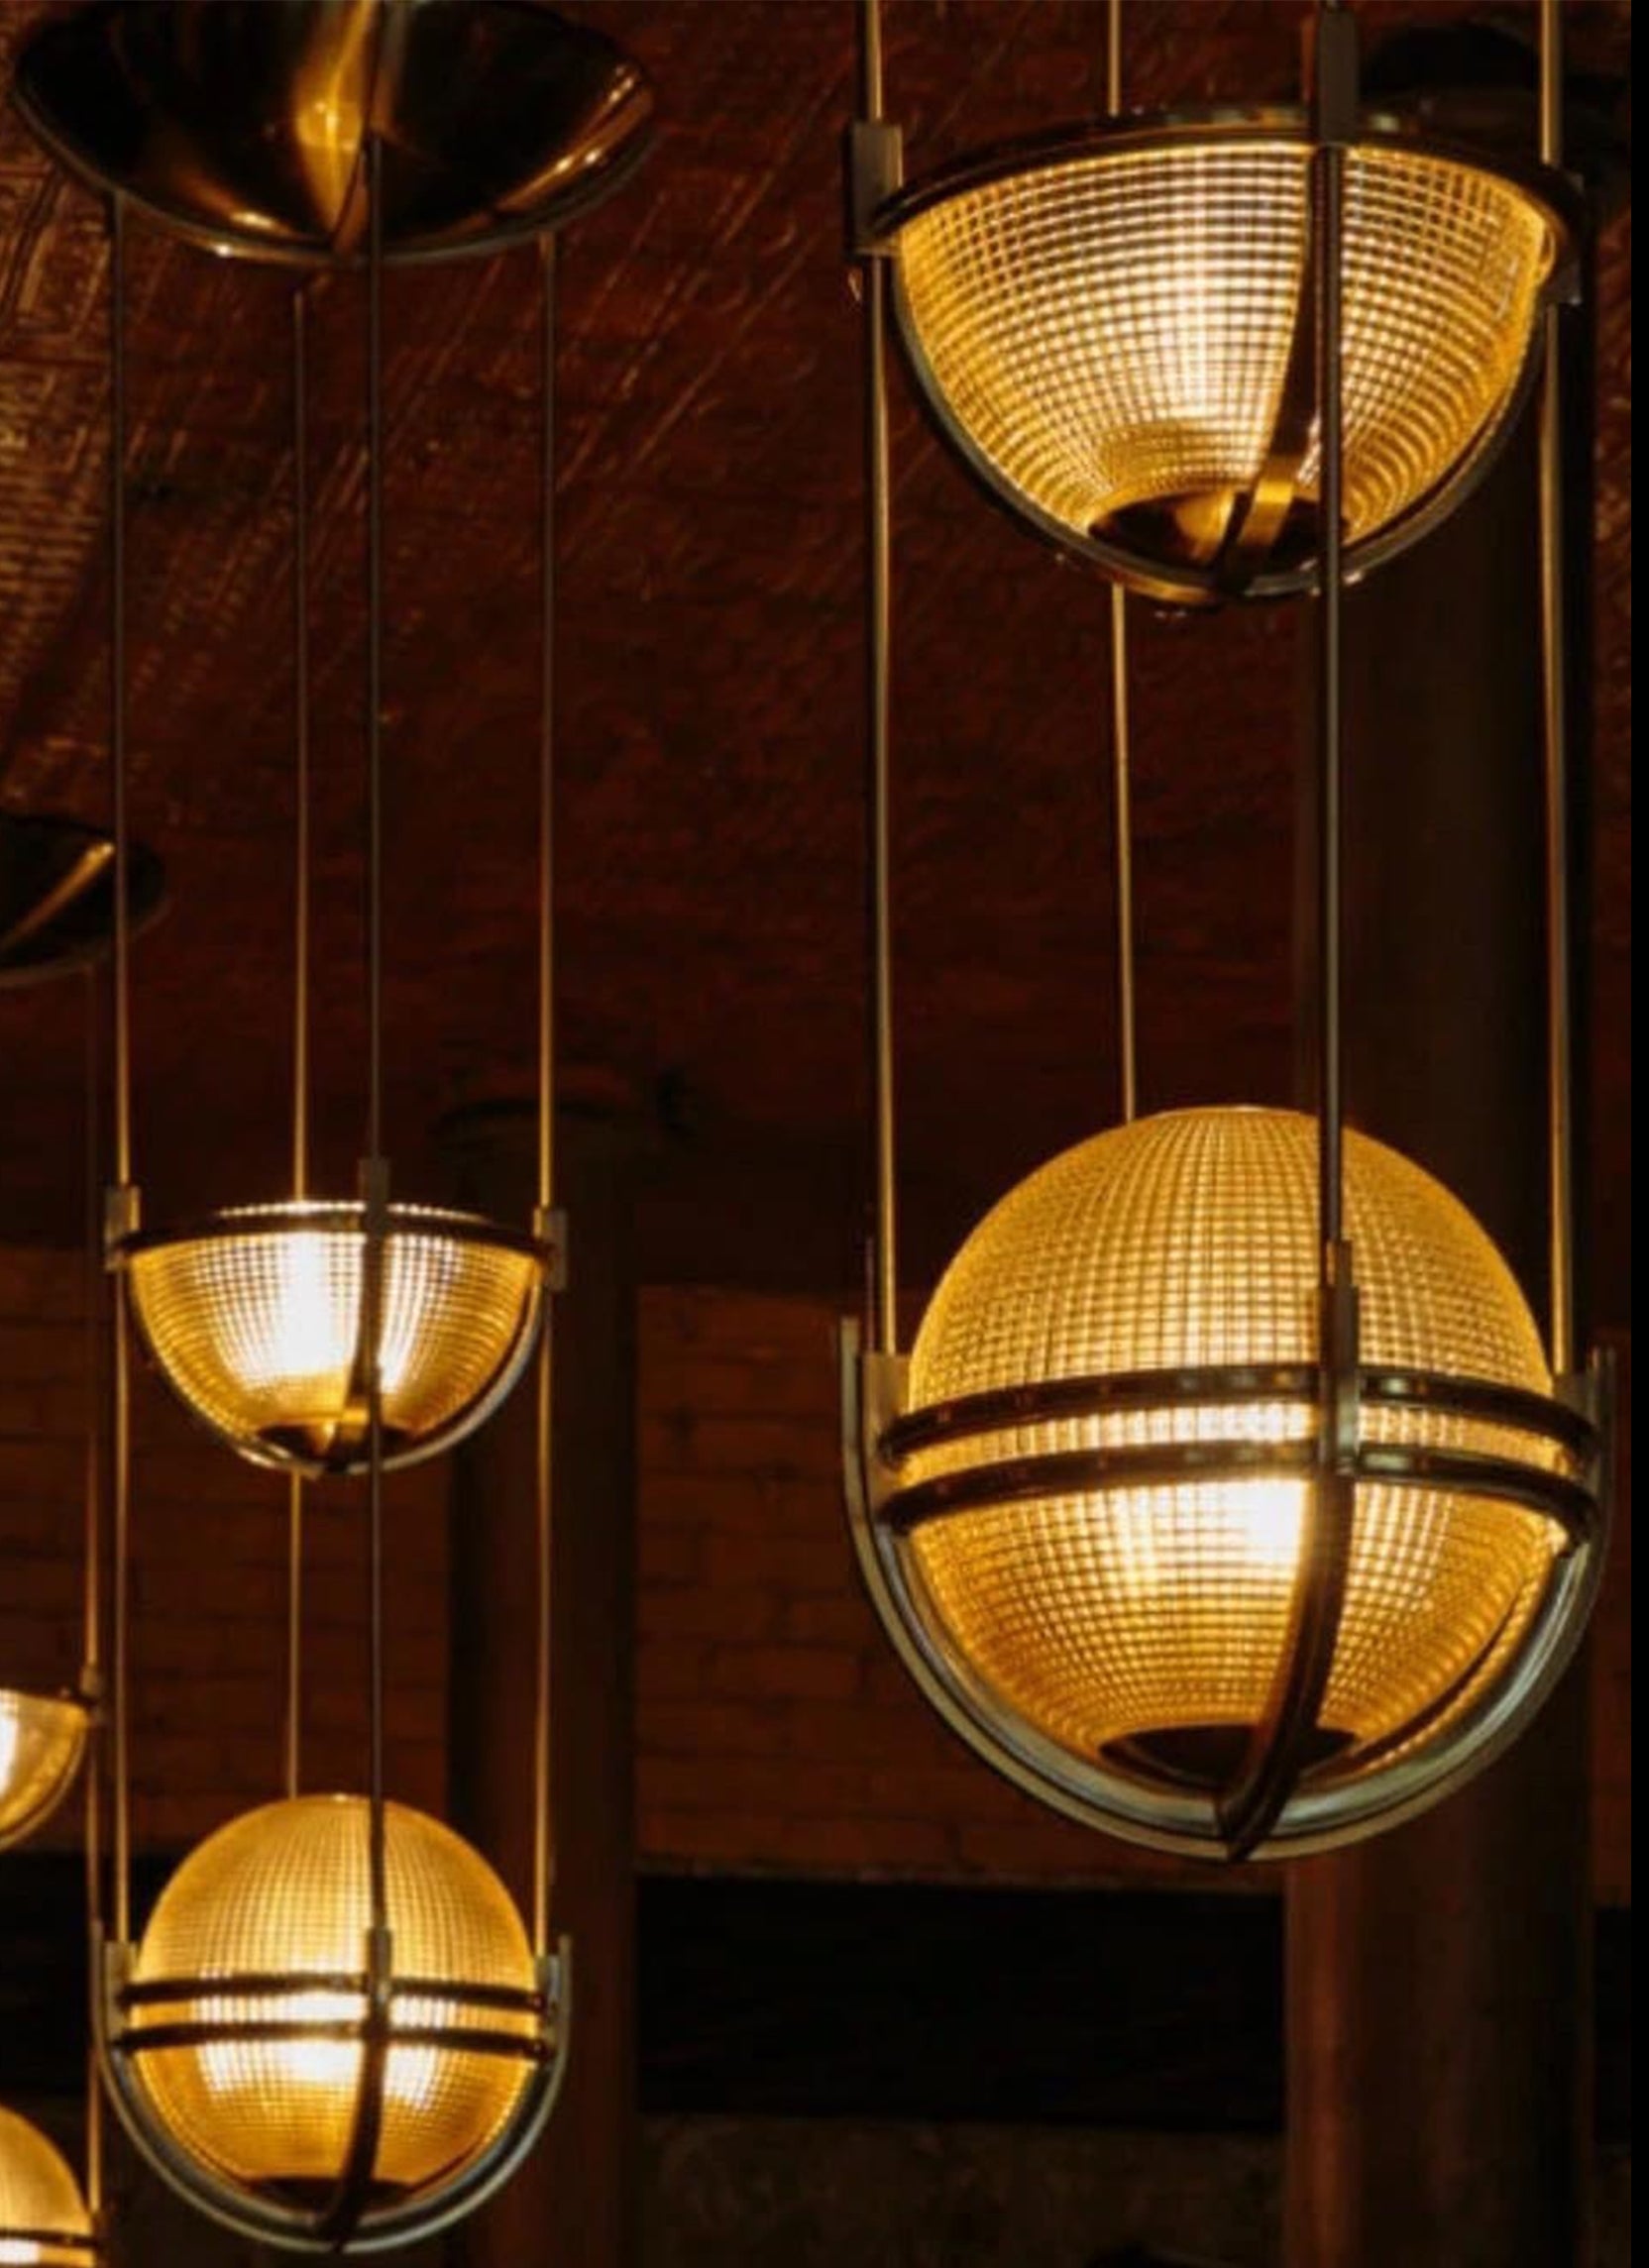 A pair of Art Deco Holophane Globular glass pendant ceiling lights white metal with brass finishing touches made for a London Bar

Modern era lighting that evokes the beautiful globular lines of the Art Deco aesthetic.

